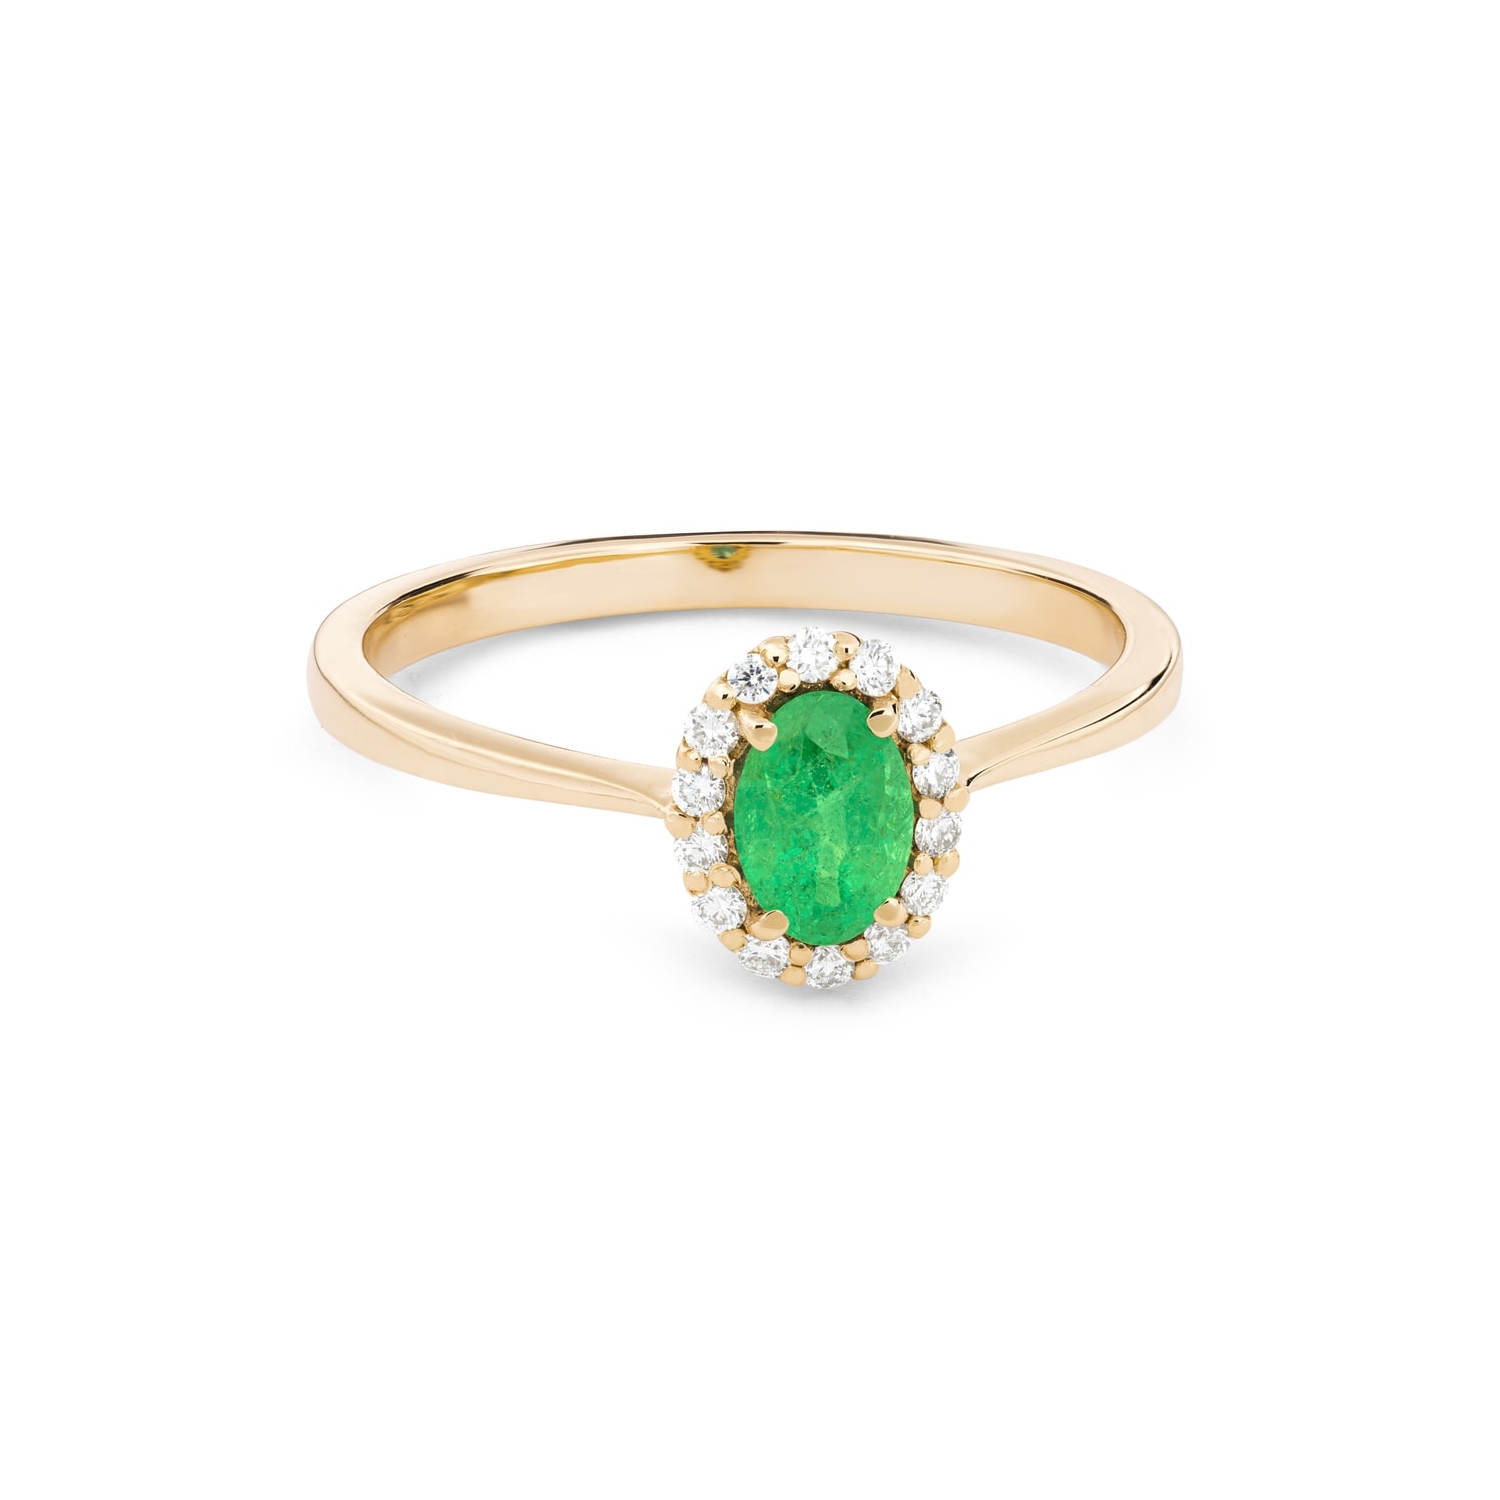 Gold ring with gemstones "Emerald 66"